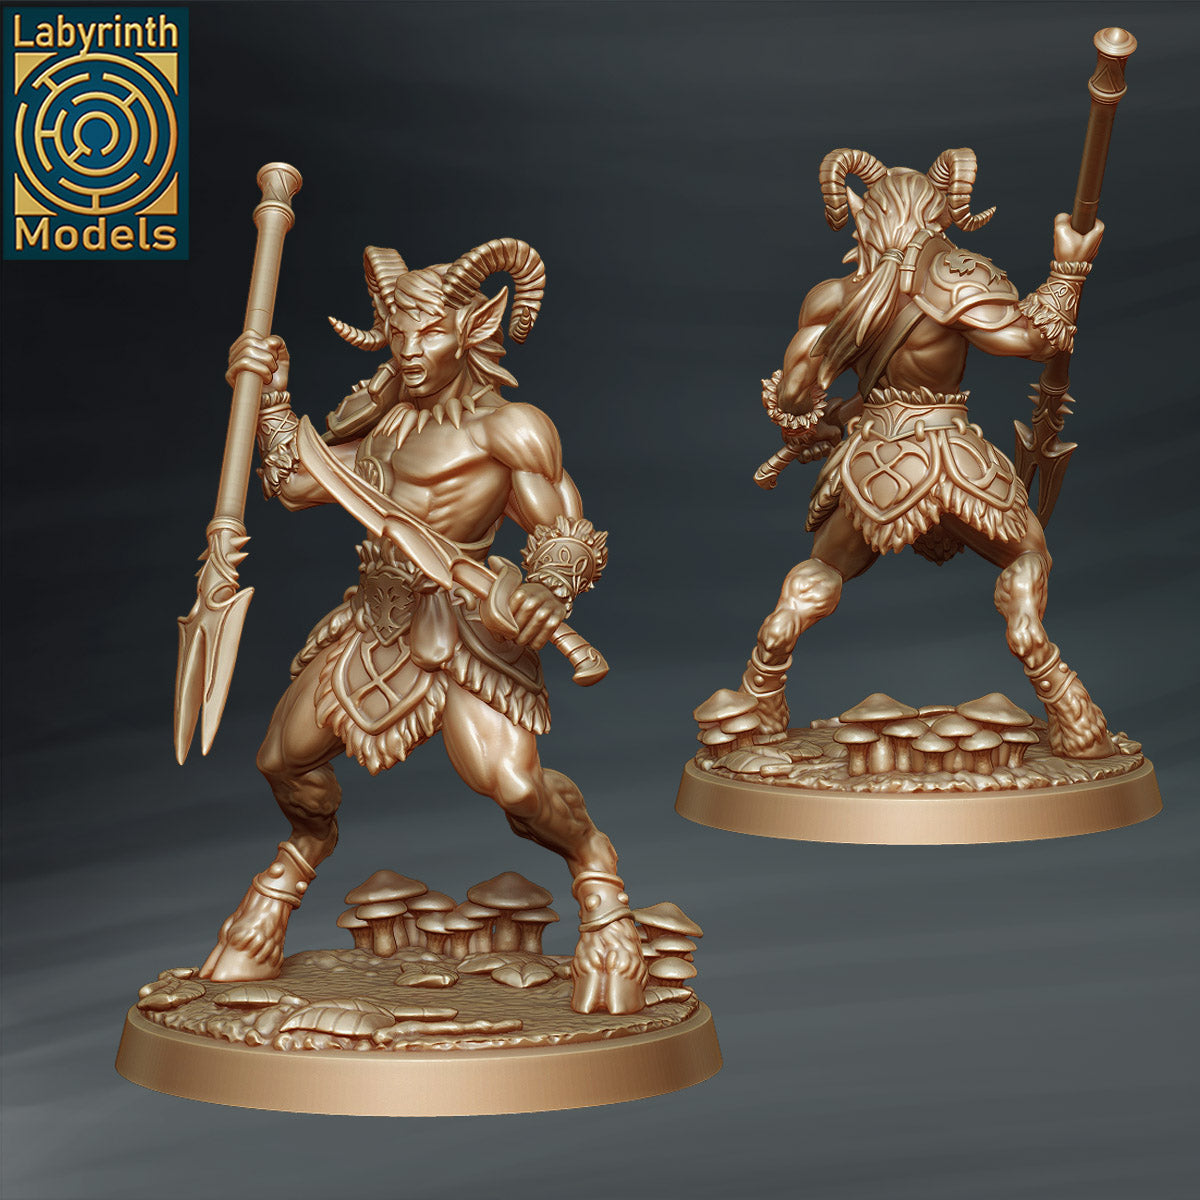 Fauns by Labyrinth Models